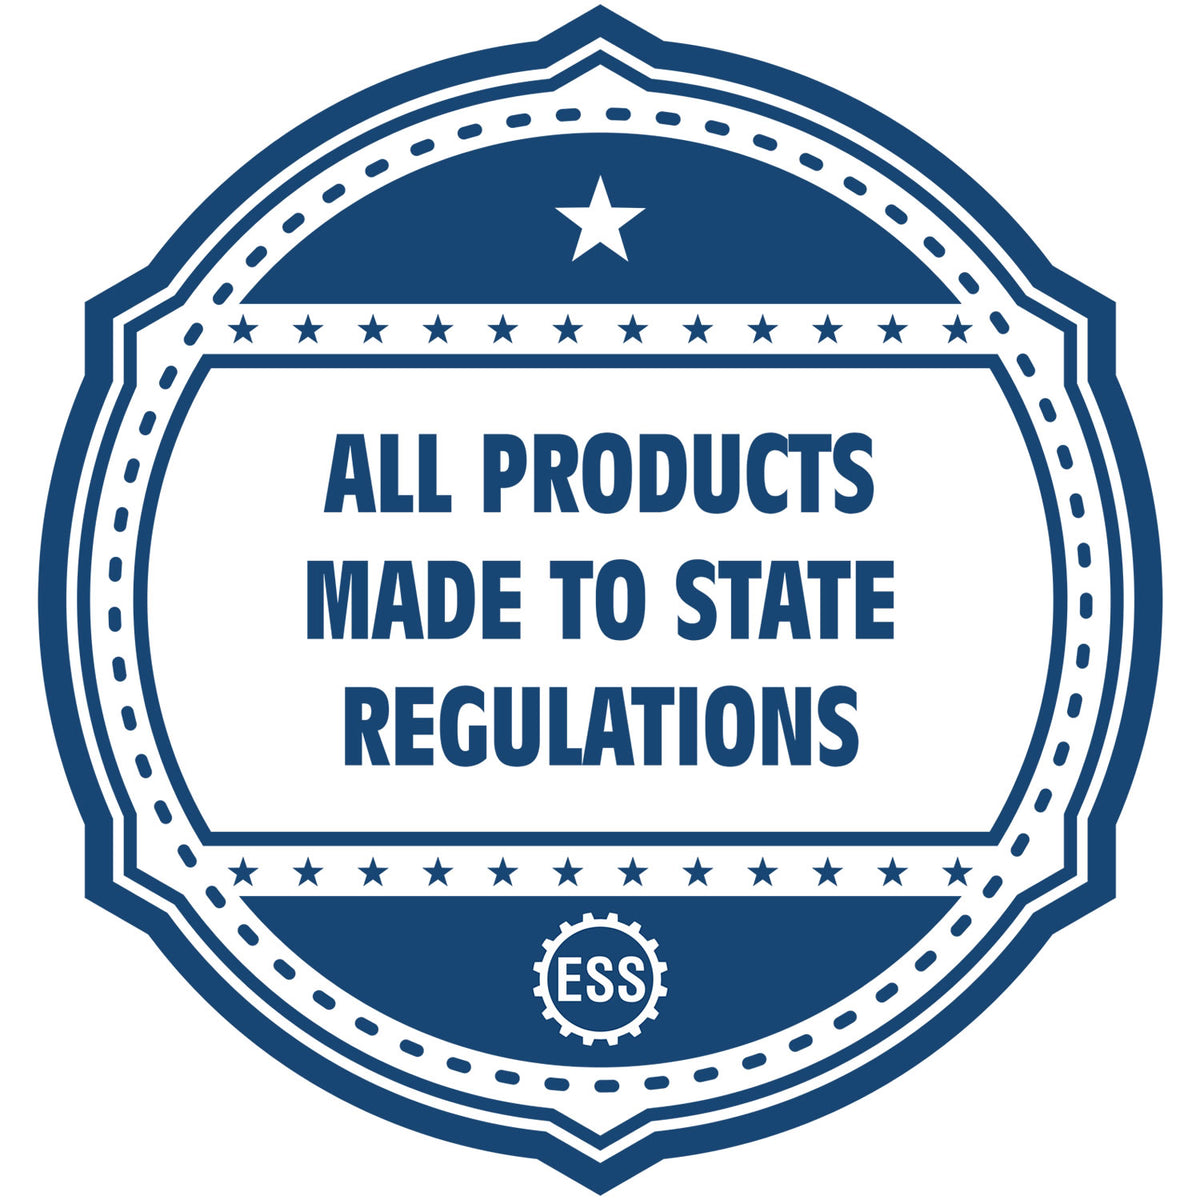 An icon or badge element for the Slim Pre-Inked Minnesota Professional Engineer Seal Stamp showing that this product is made in compliance with state regulations.